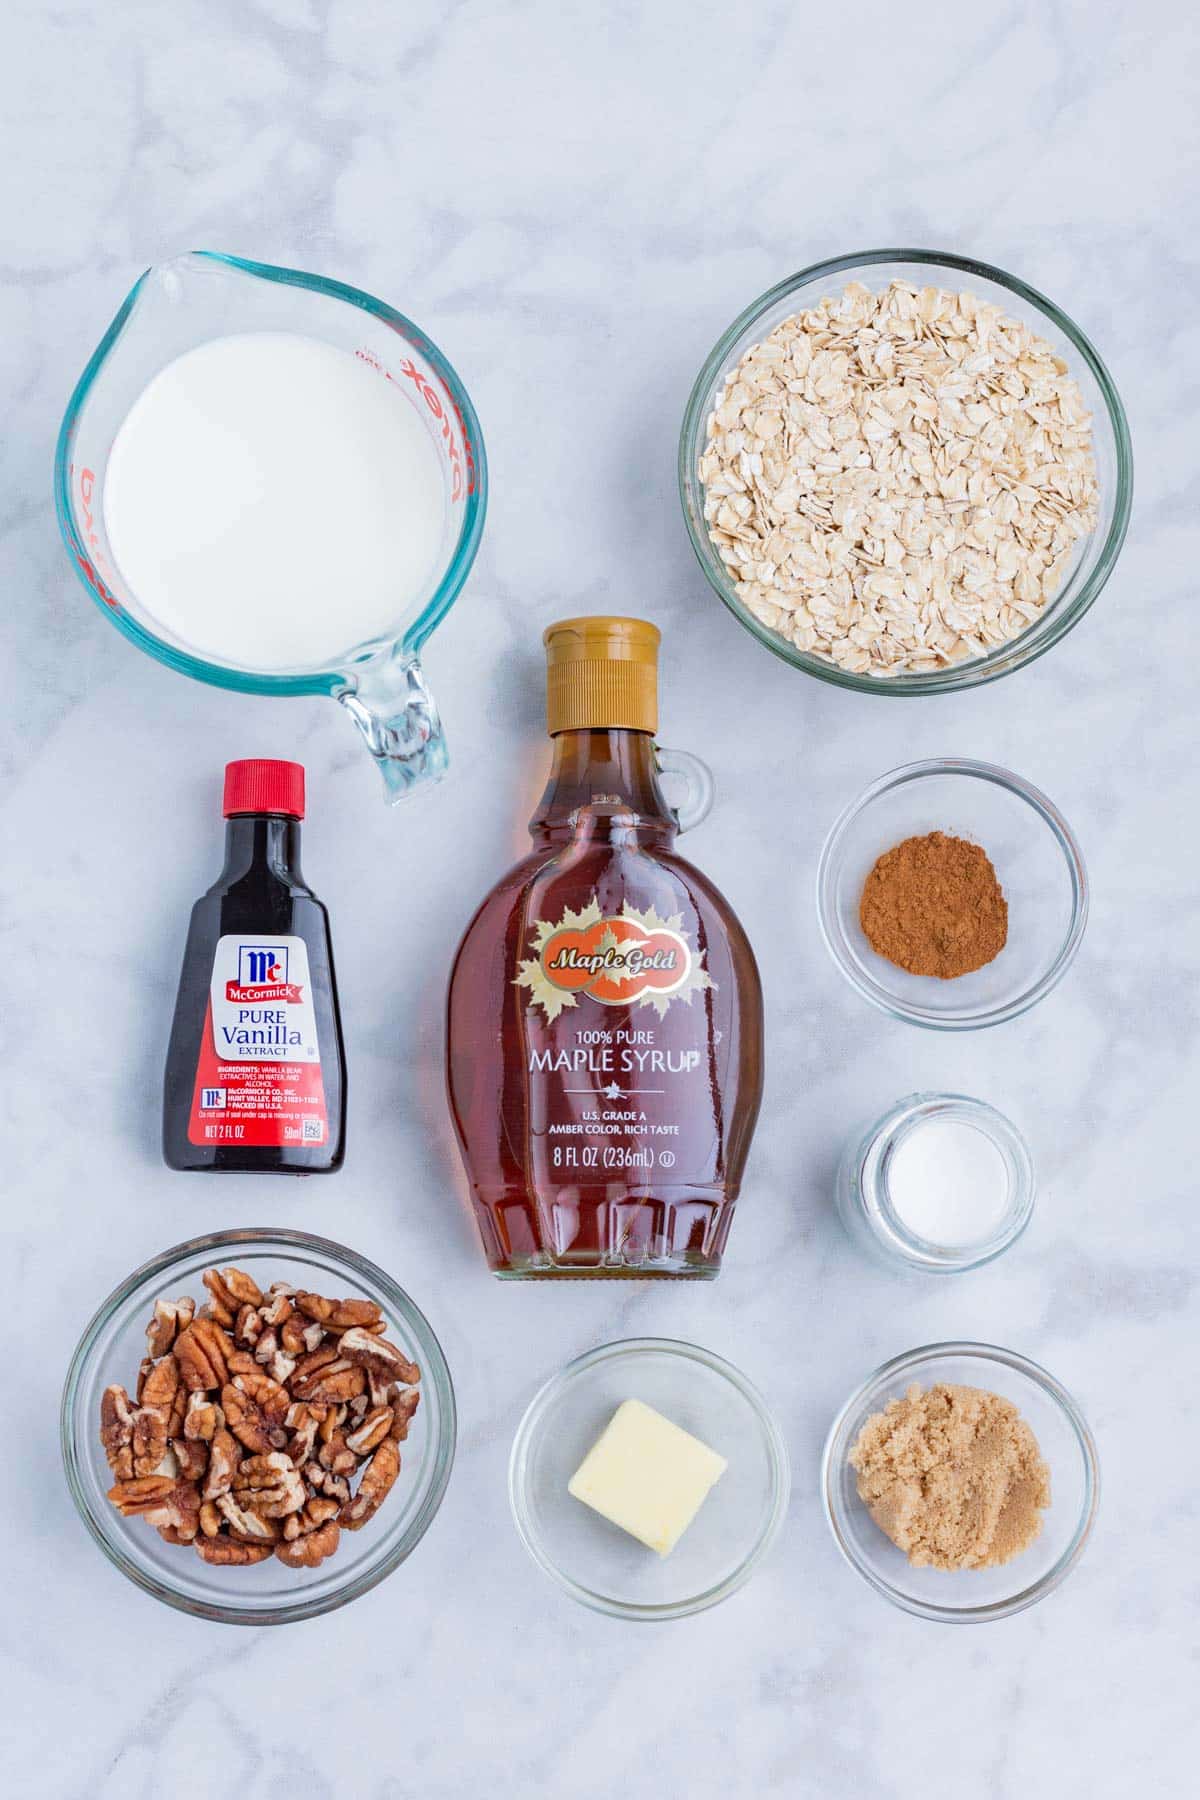 Oatmeal, maple syrup, brown sugar, milk, salt, and cinnamon are the ingredients for this recipe.